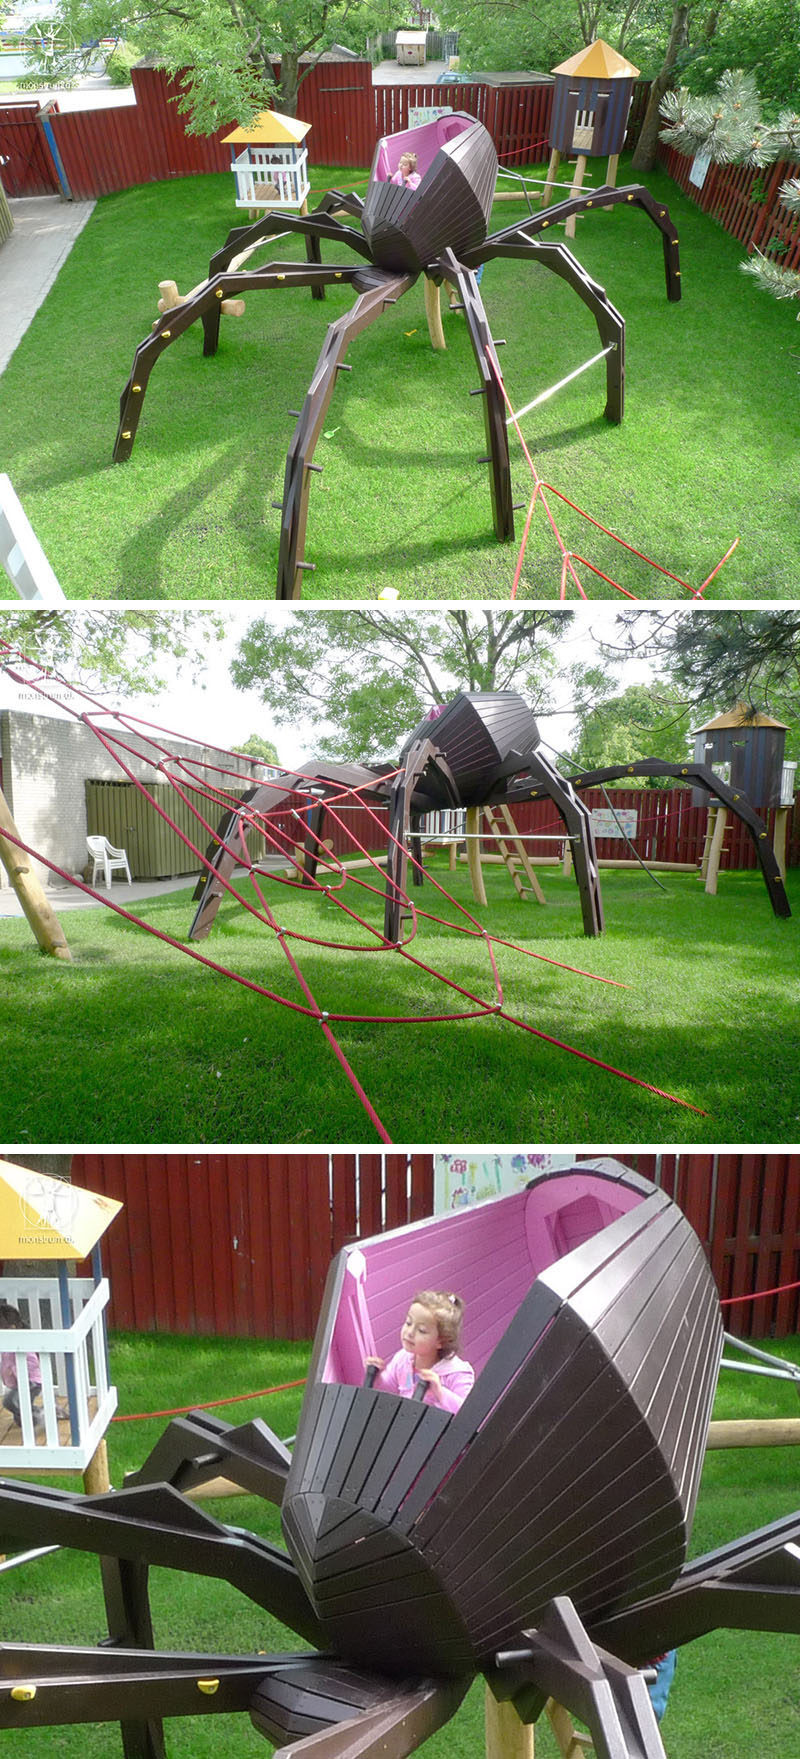 15 Amazing, Unique And Creative Playgrounds // A Huge Spider and Web